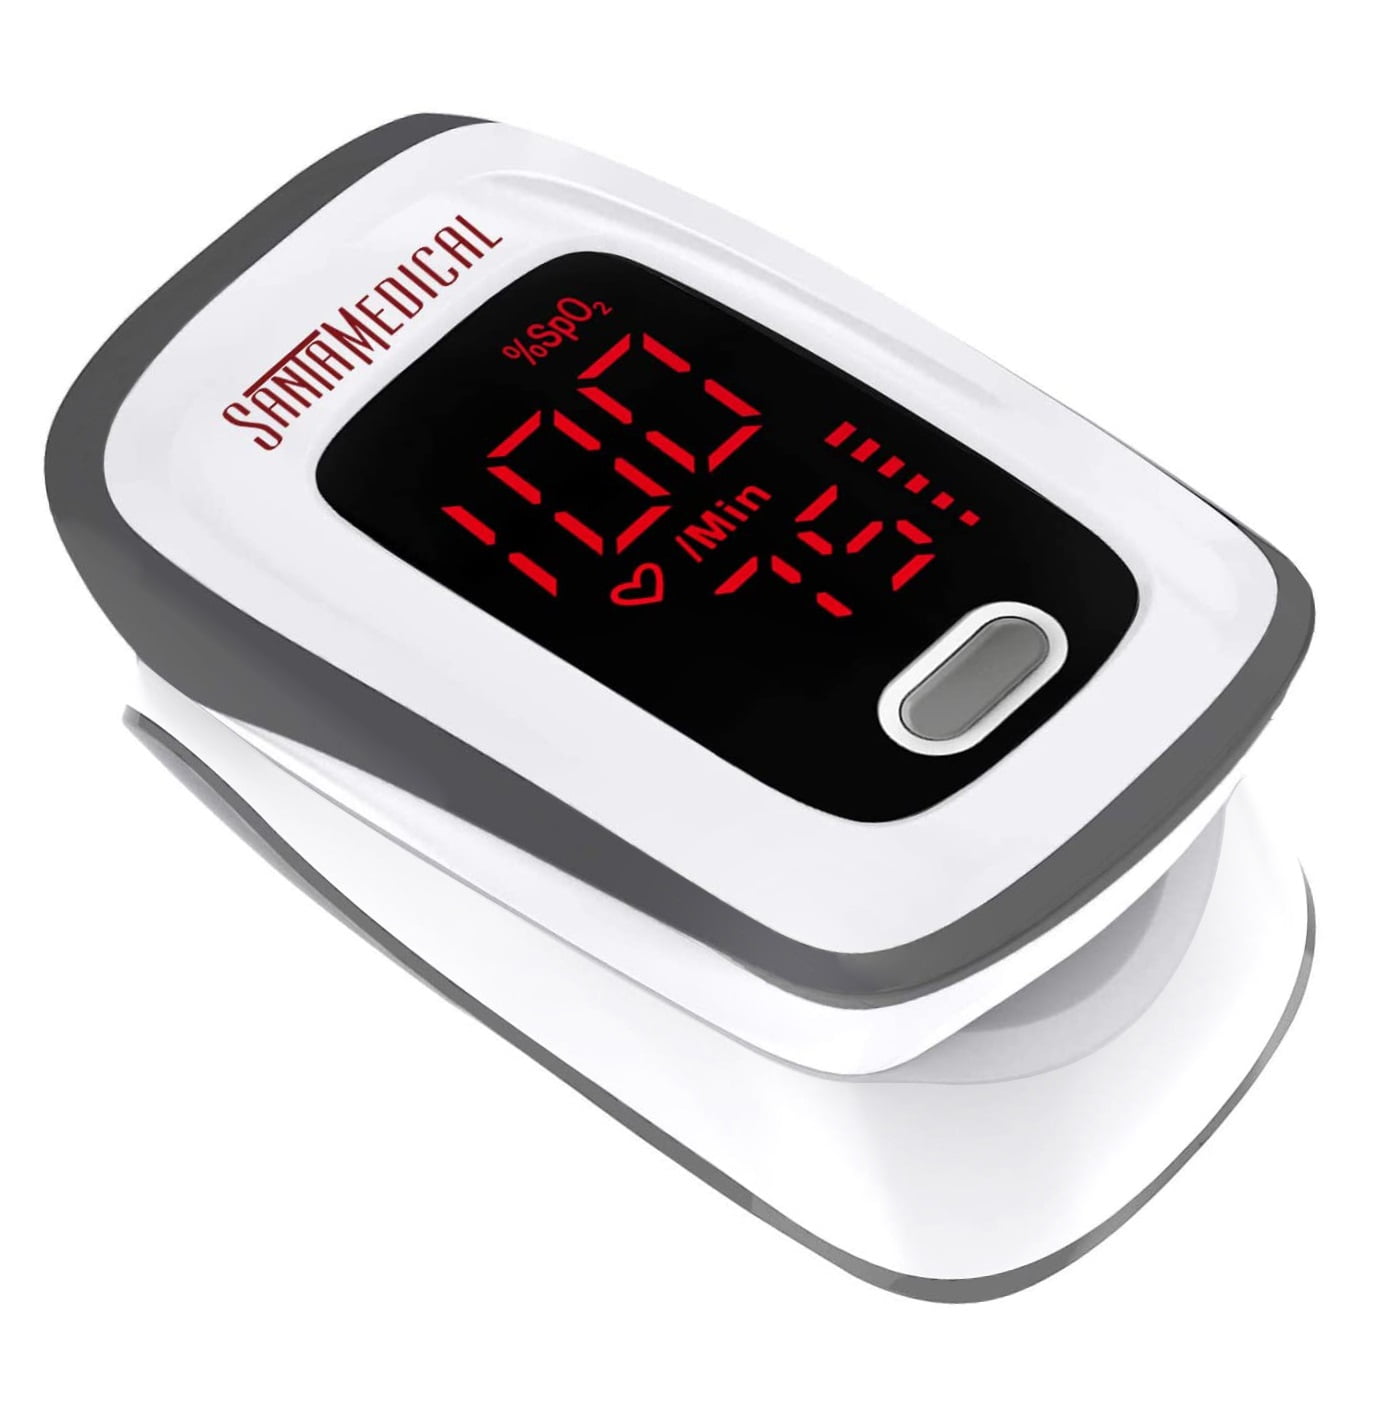 Arrive in 3-5 Days Dream Maker Fingertip Pulse Blood Oxygen Saturation Monitor Portable Pulse Rate Saturation Monitor Blood Oxygen Meter Sensor Spo2 Suitable for Adult and Kids US Stock 